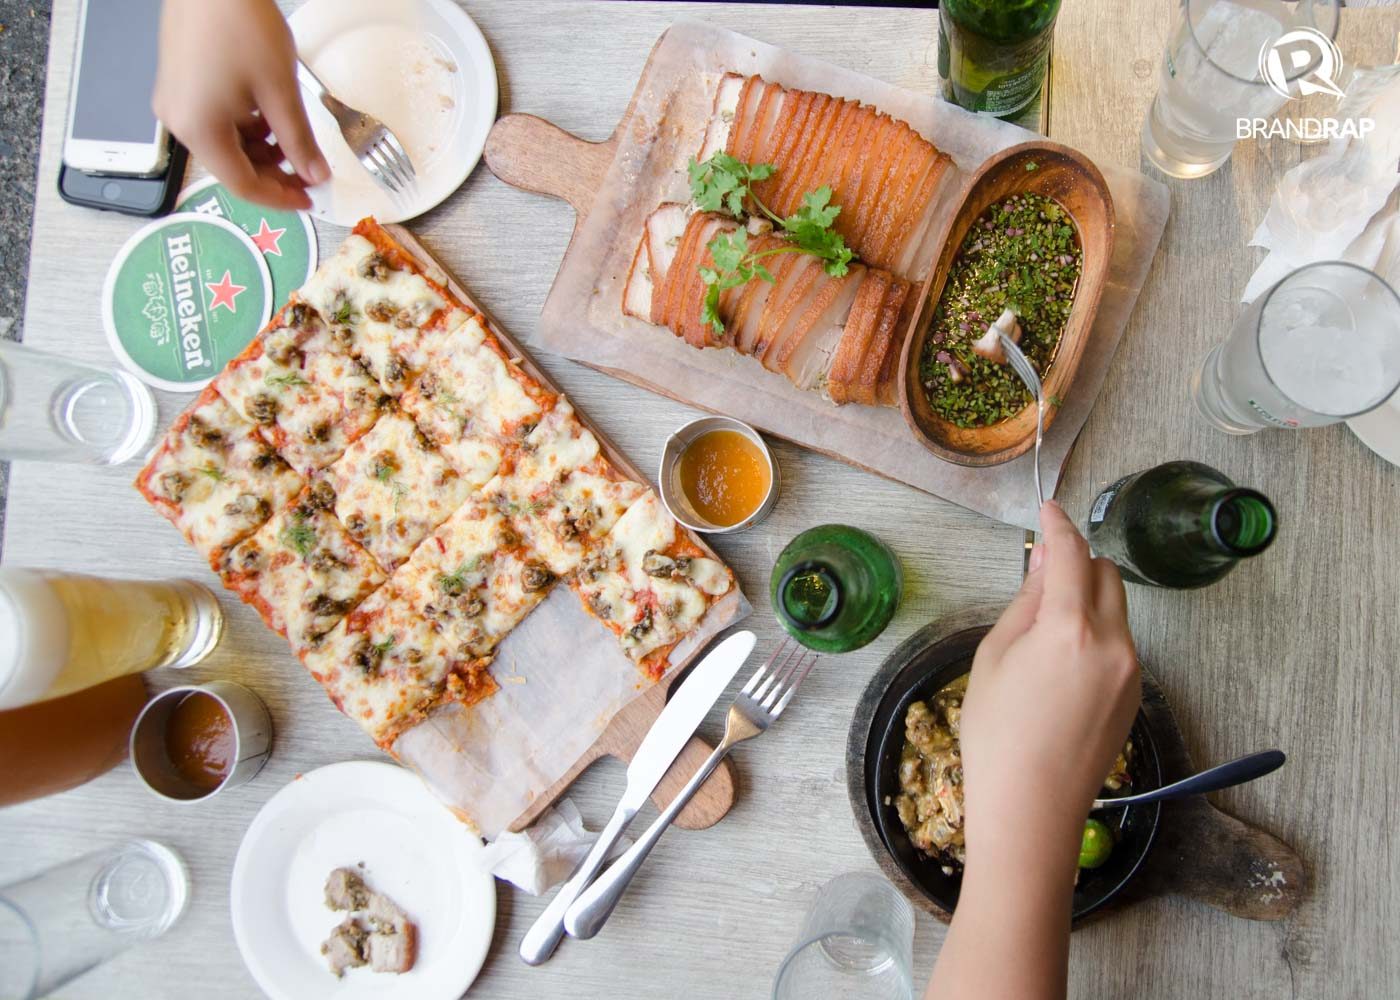 HEARTY. Habanero offers dishes infused by the habanero chili peppers like the Mussels Sisig Pizza, Oysters Sisig, and Lechon Habanero. Photo by Pauee Cadaing/Rappler 